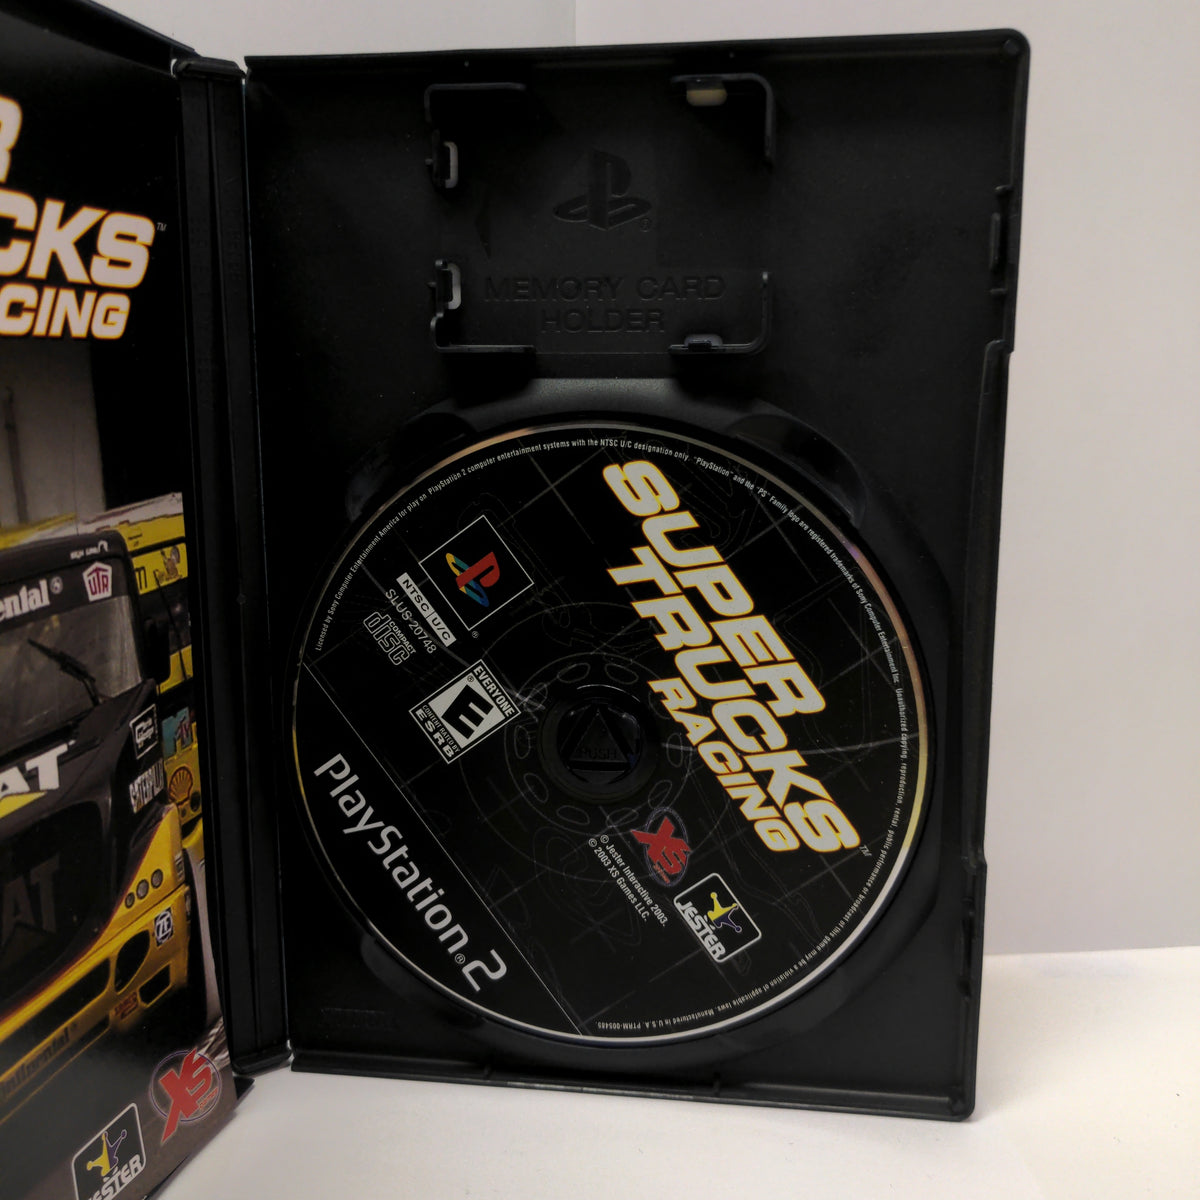 Super Trucks Racing for PS2 [video game] : : Games e